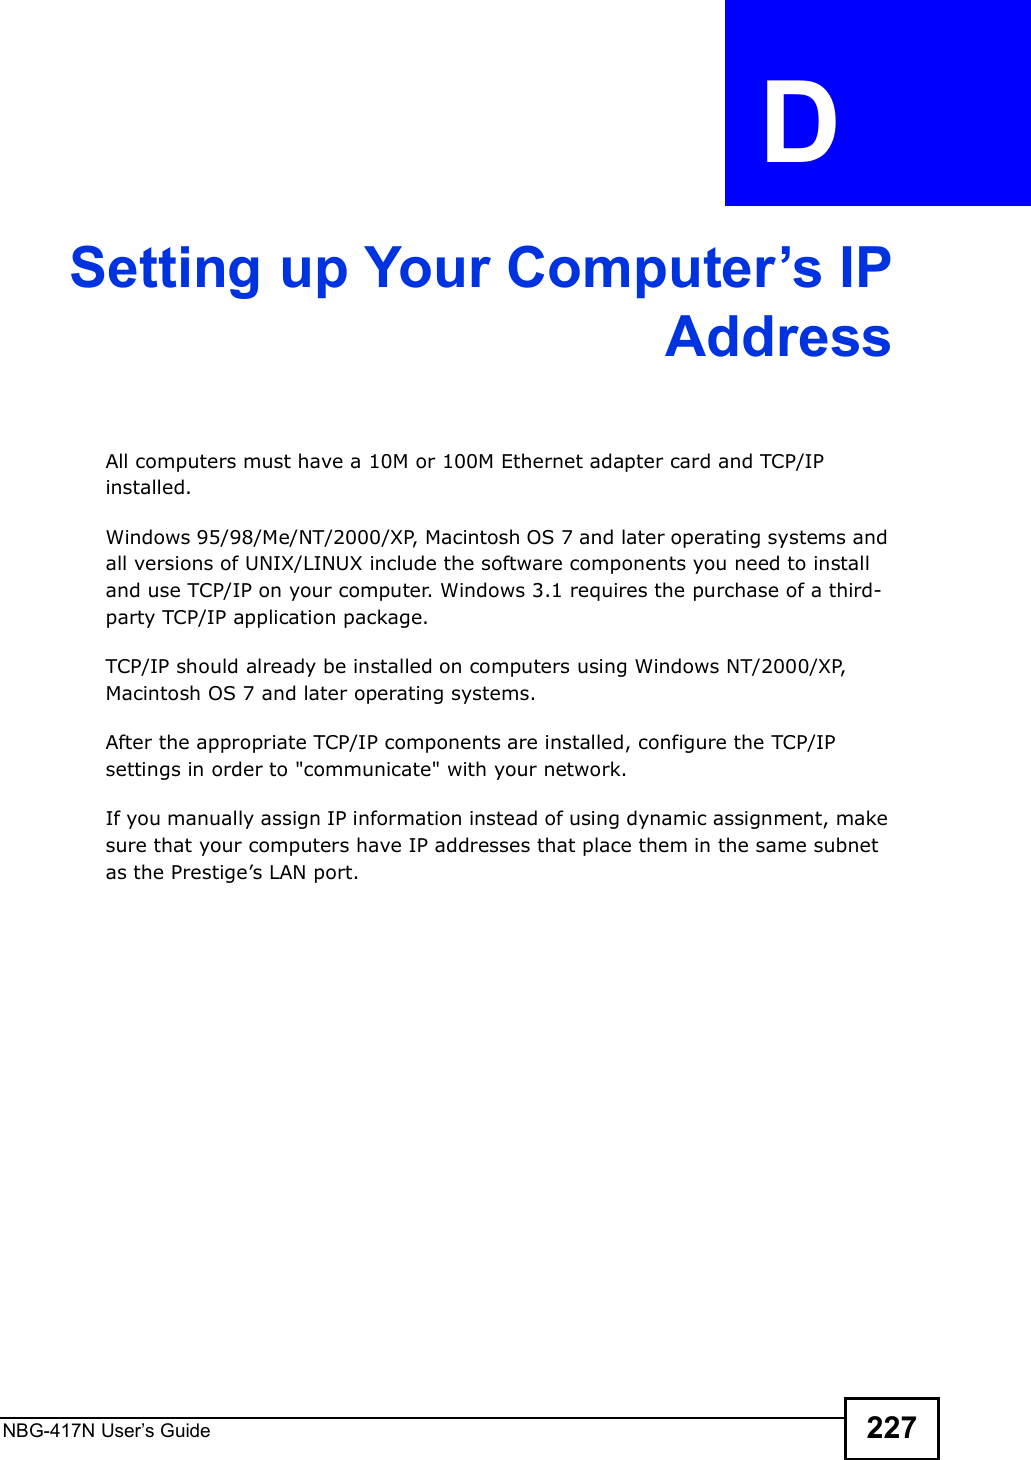 NBG-417N User s Guide 227APPENDIX  D Setting up Your Computer#s IPAddressAll computers must have a 10M or 100M Ethernet adapter card and TCP/IP installed. Windows 95/98/Me/NT/2000/XP, Macintosh OS 7 and later operating systems and all versions of UNIX/LINUX include the software components you need to install and use TCP/IP on your computer. Windows 3.1 requires the purchase of a third-party TCP/IP application package.TCP/IP should already be installed on computers using Windows NT/2000/XP, Macintosh OS 7 and later operating systems.After the appropriate TCP/IP components are installed, configure the TCP/IP settings in order to &quot;communicate&quot; with your network. If you manually assign IP information instead of using dynamic assignment, make sure that your computers have IP addresses that place them in the same subnet as the Prestige!s LAN port.